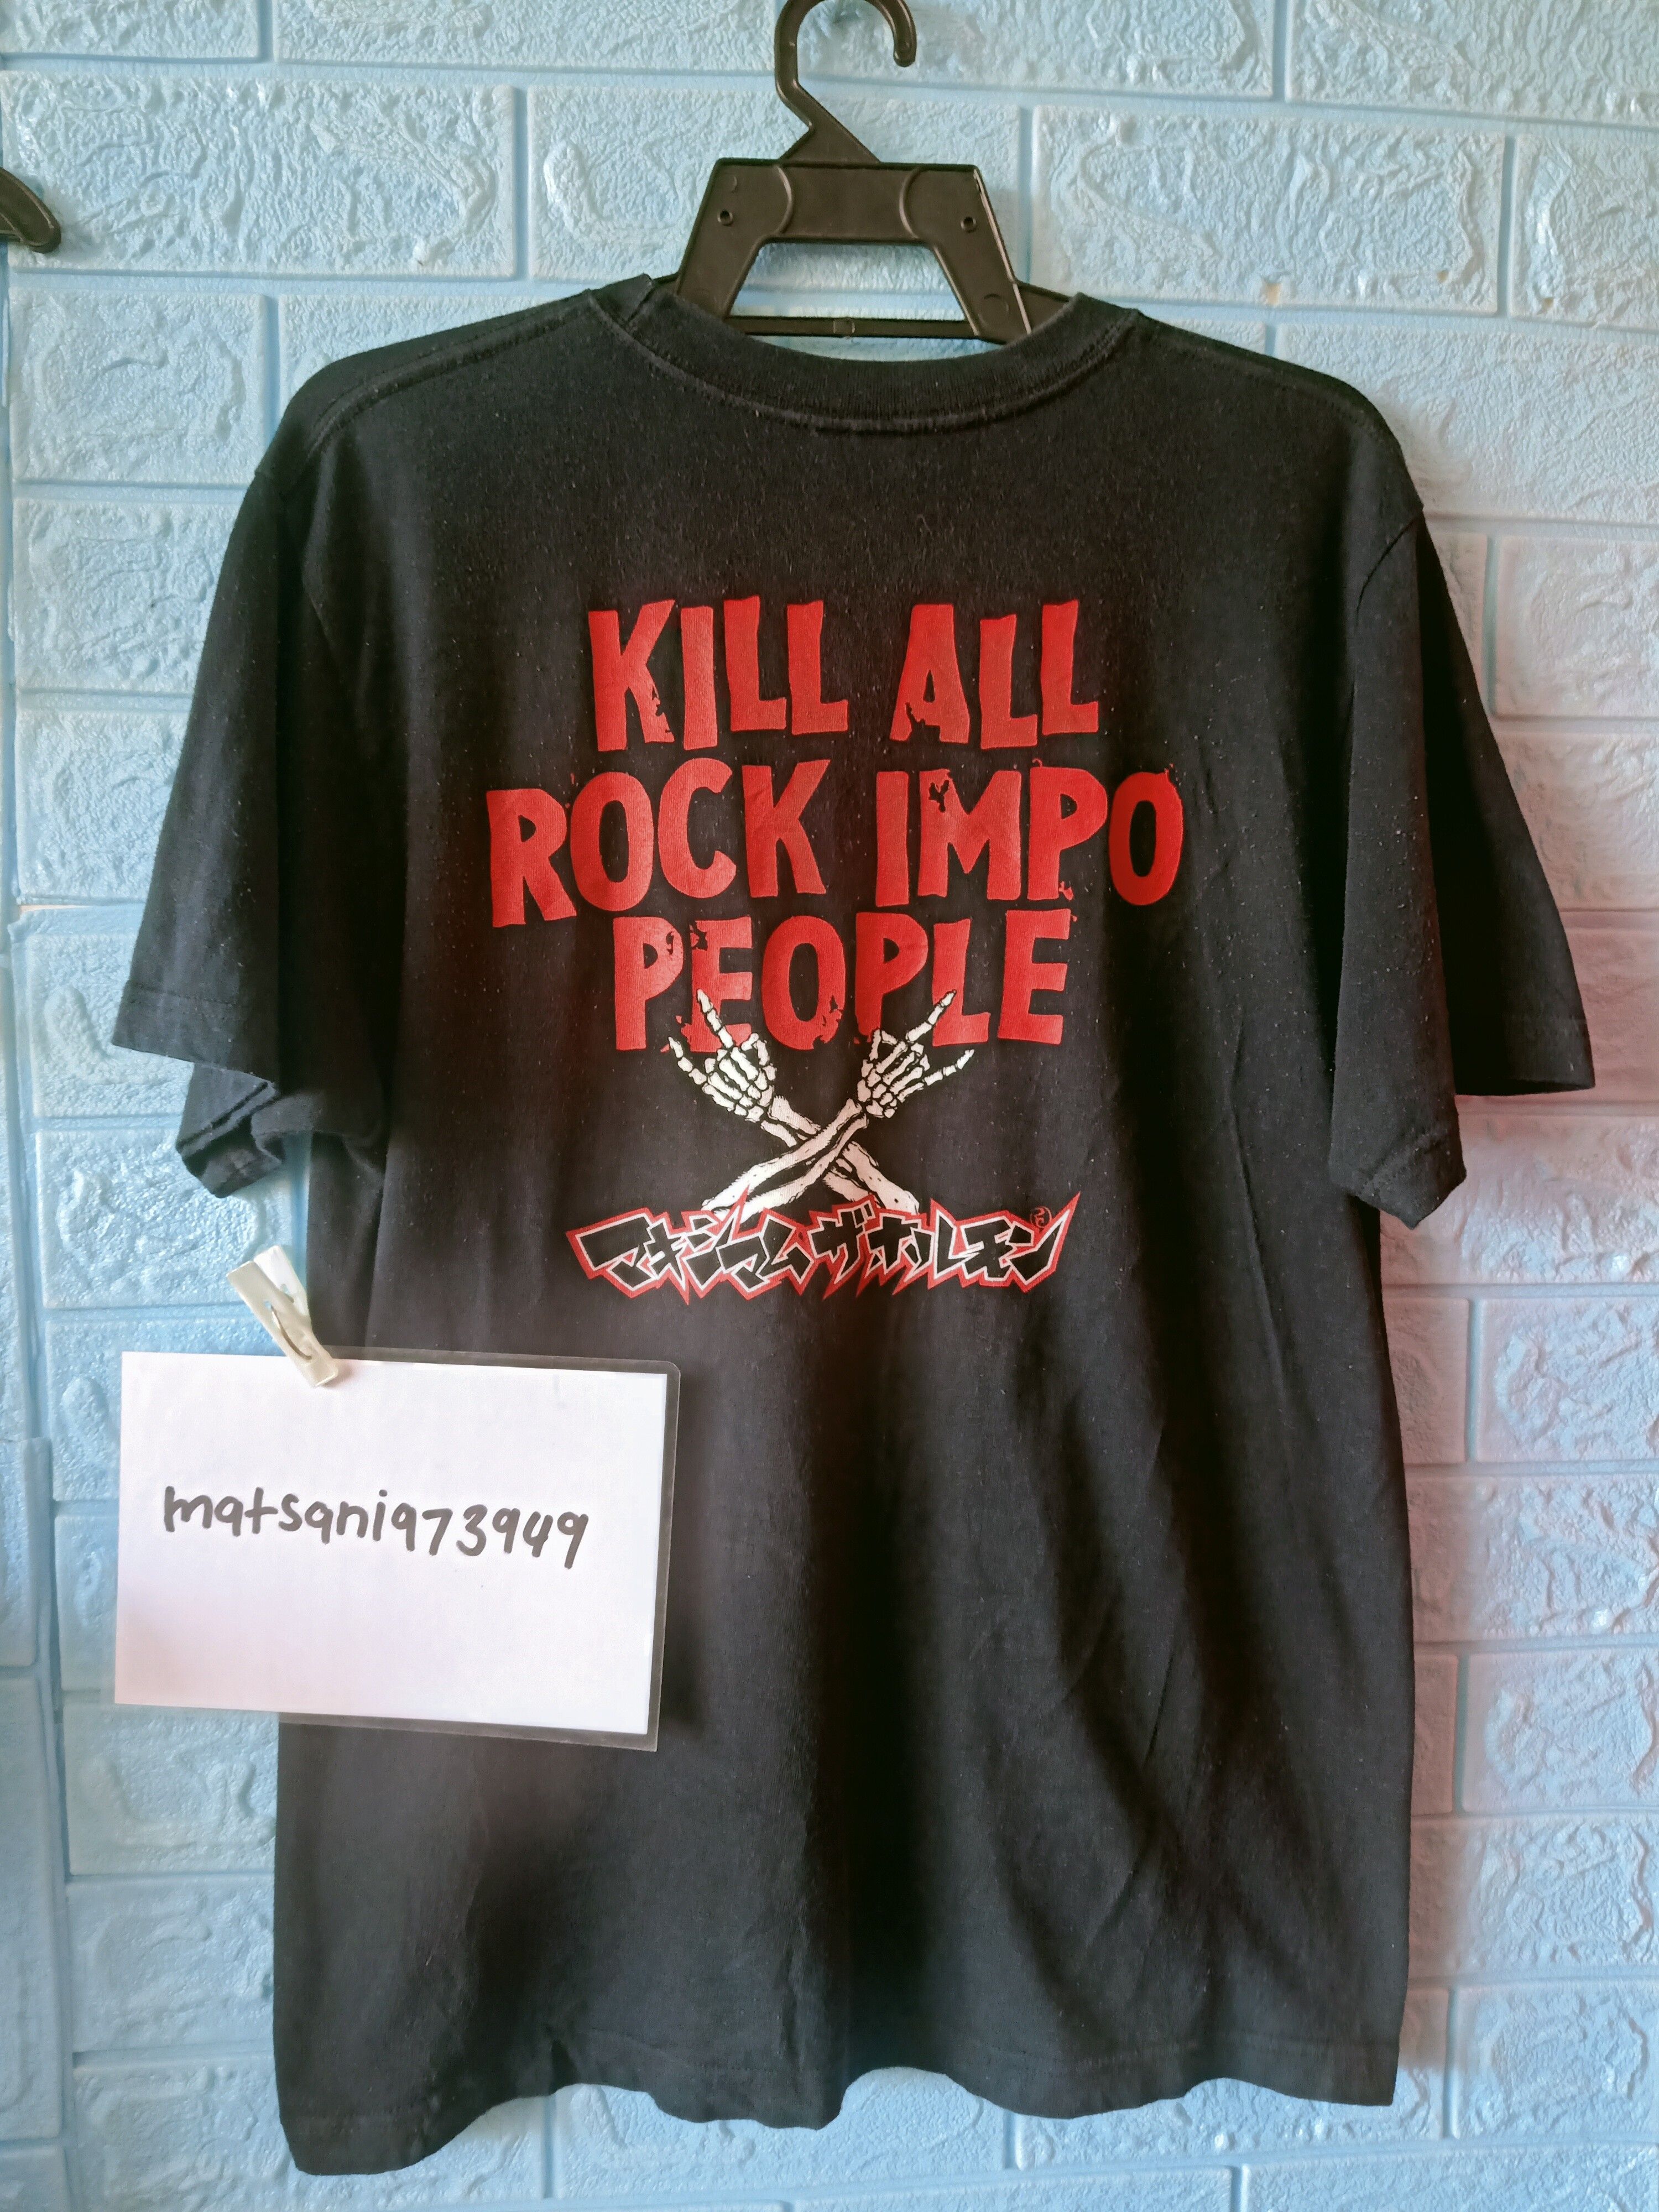 Japanese Brand kill all rock impo people | Grailed